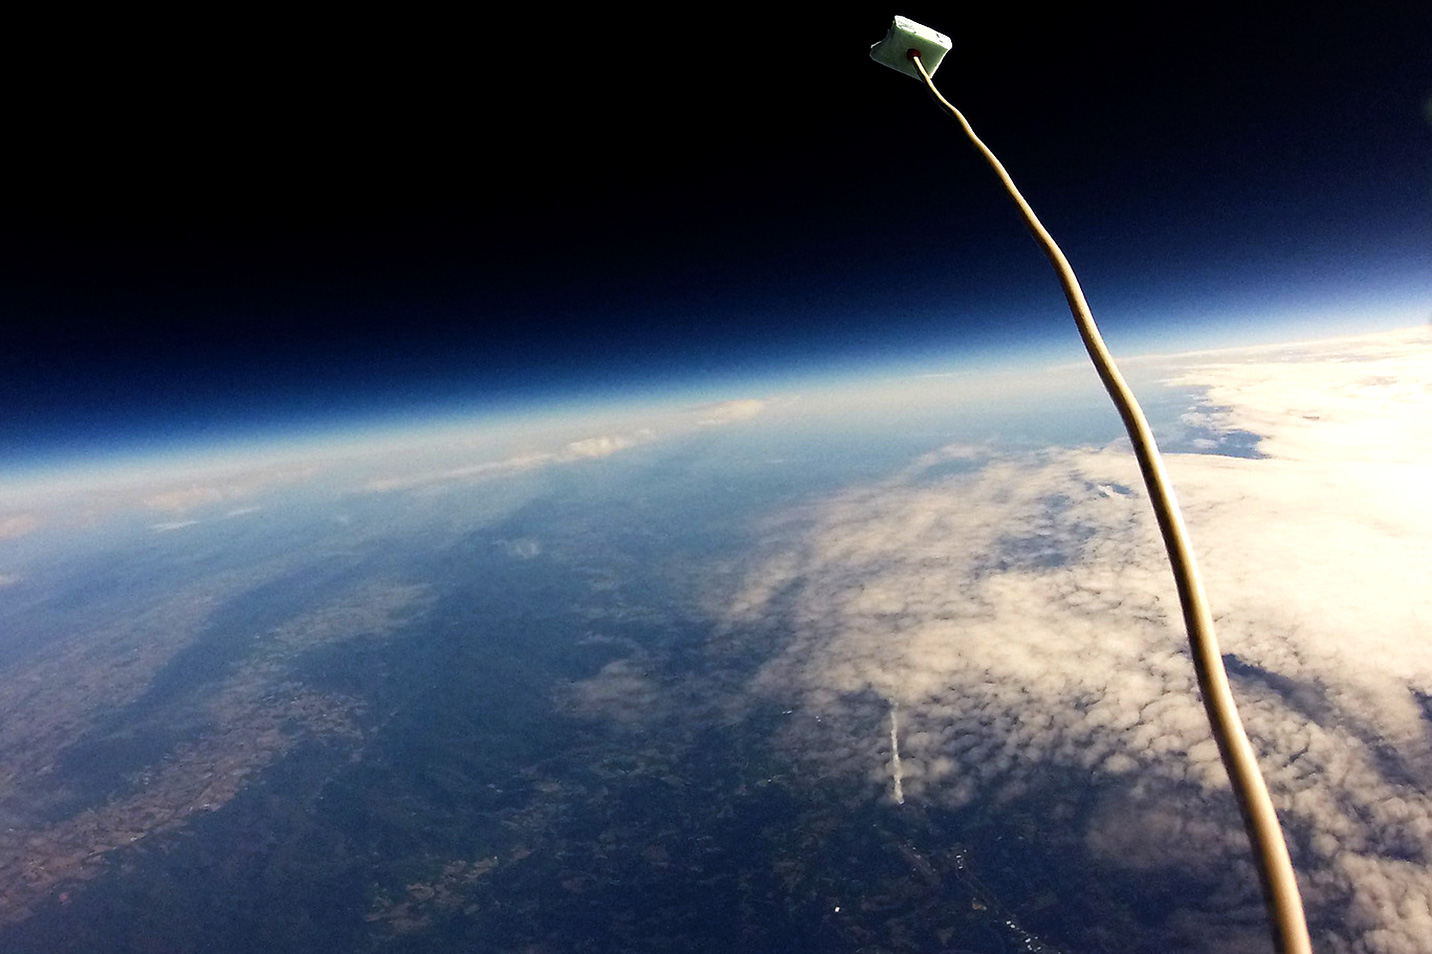 A view from a camera aboard the payload of the high-altitude weather balloon looking over the earth from space